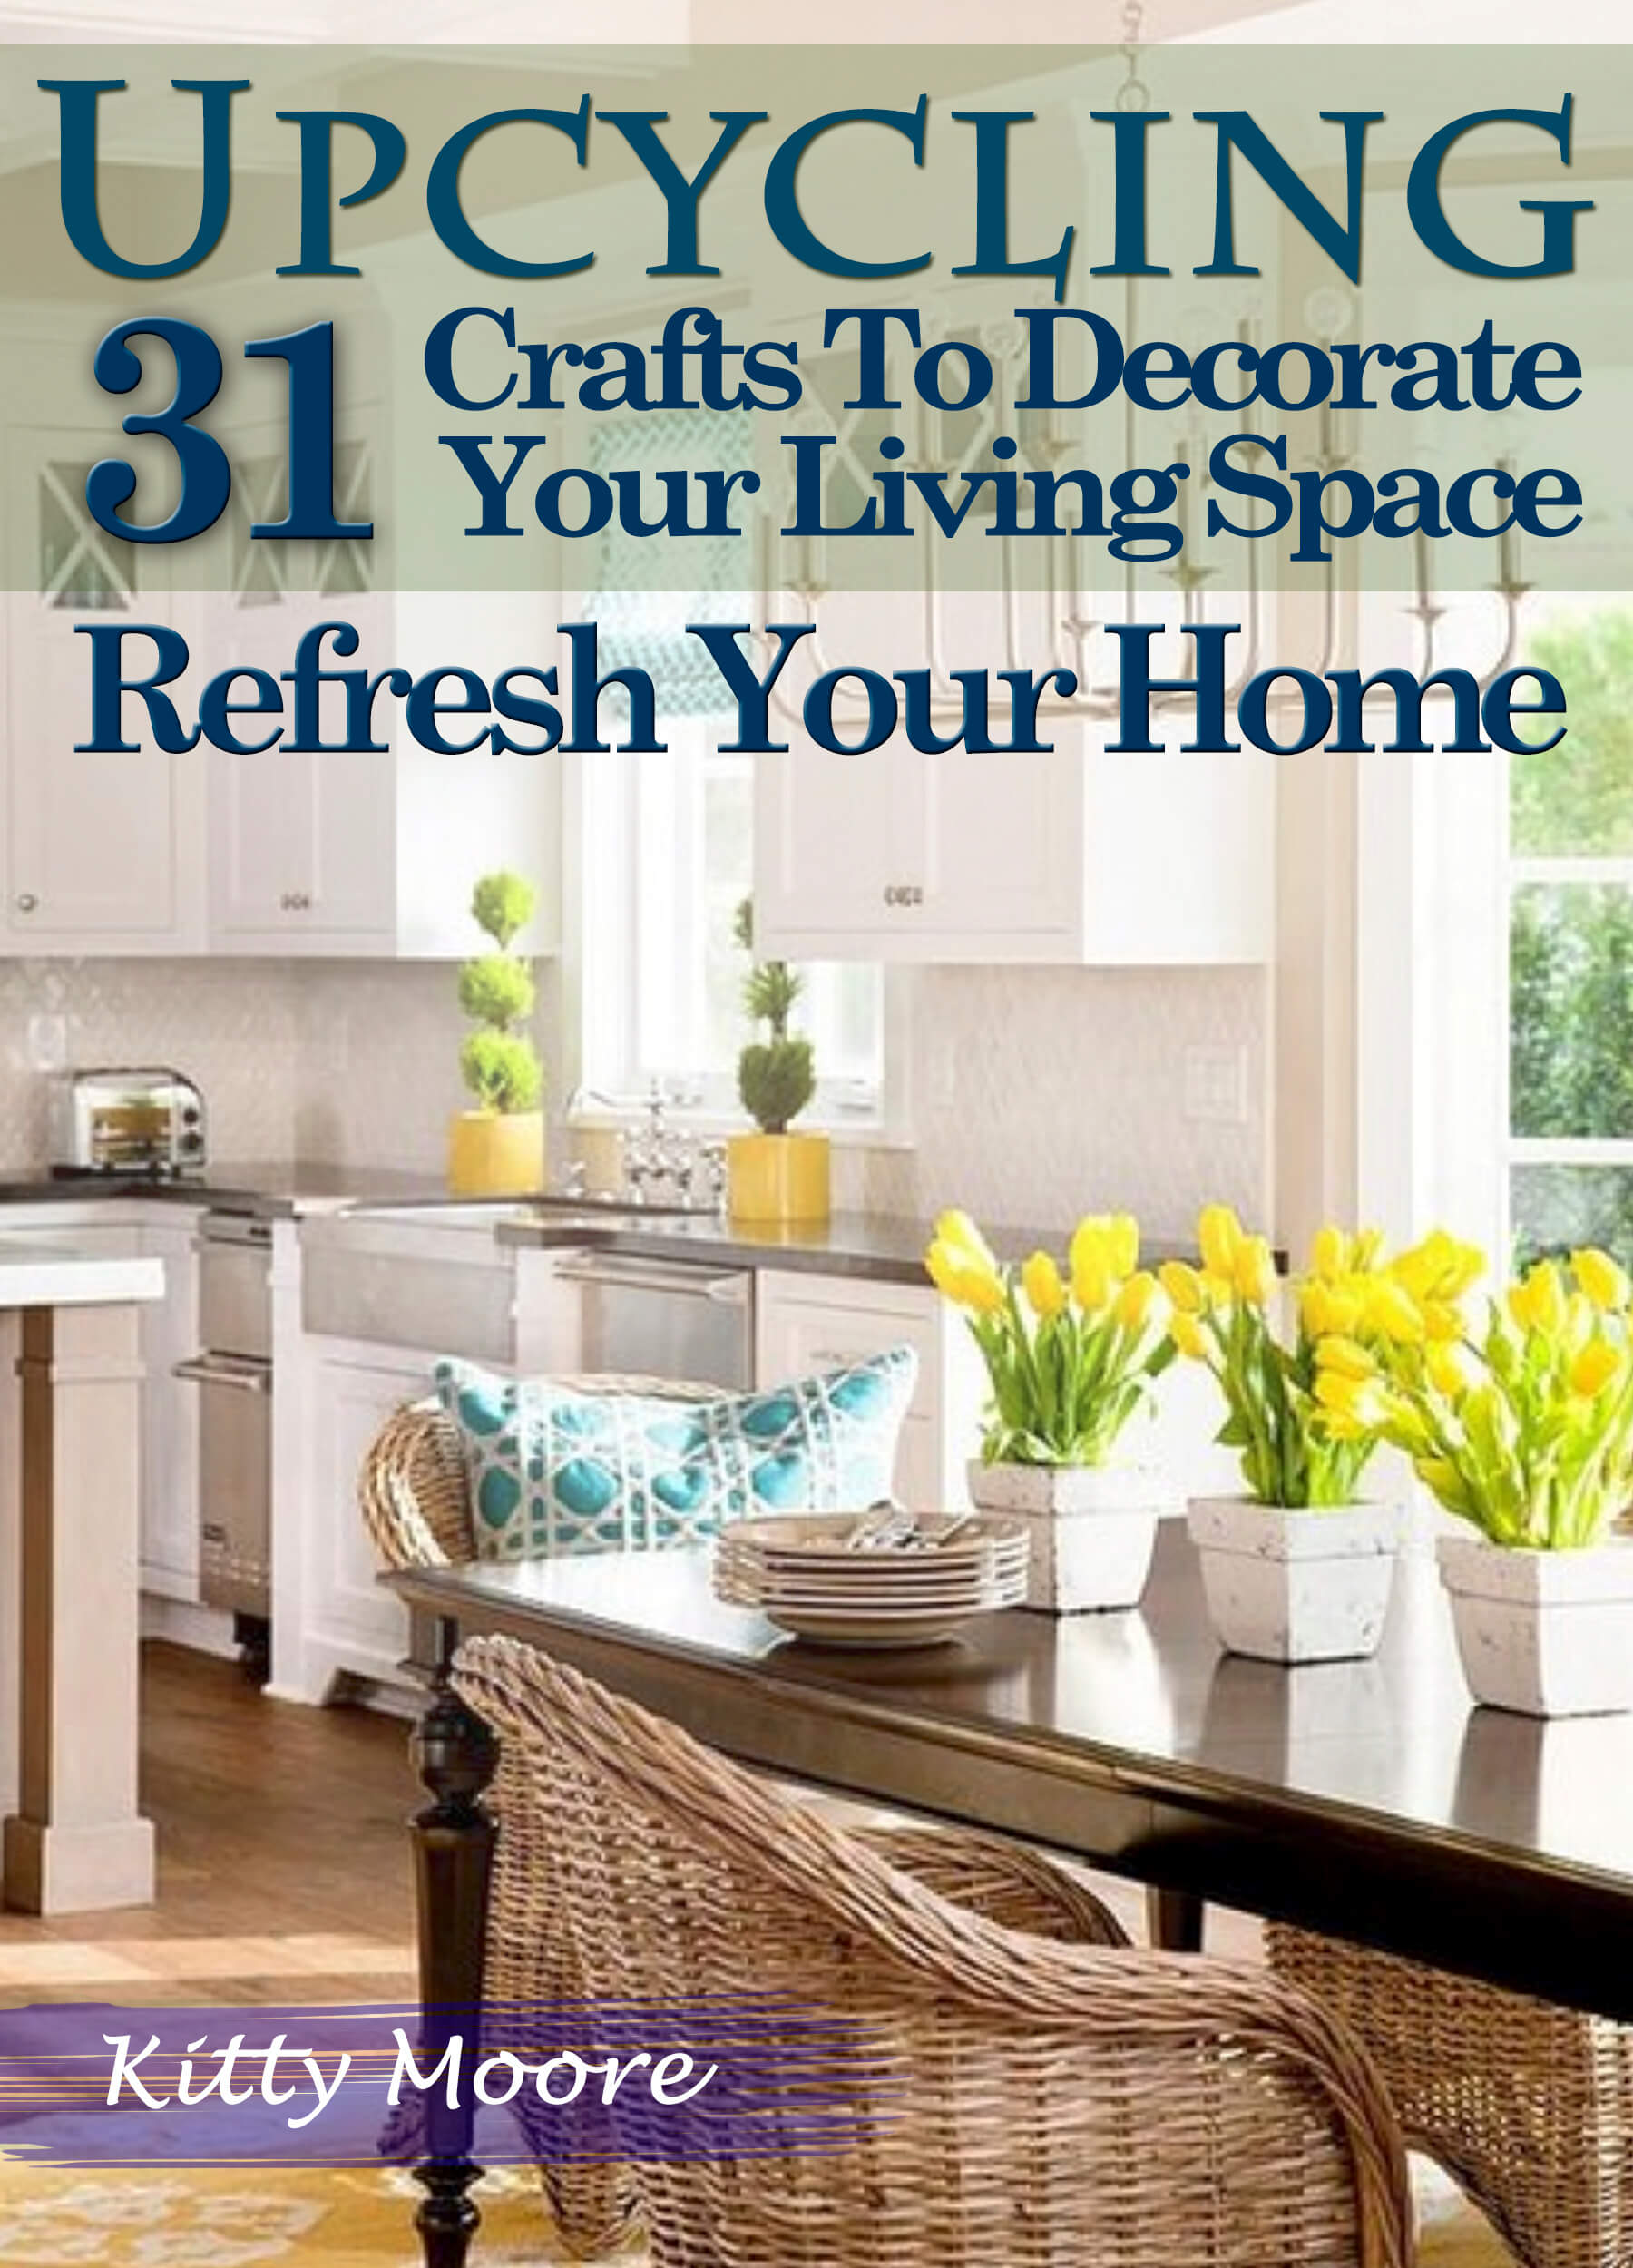 FREE: Upcycling: 31 Crafts to Decorate Your Living Space & Refresh Your Home (3rd Edition) by Kitty Moore